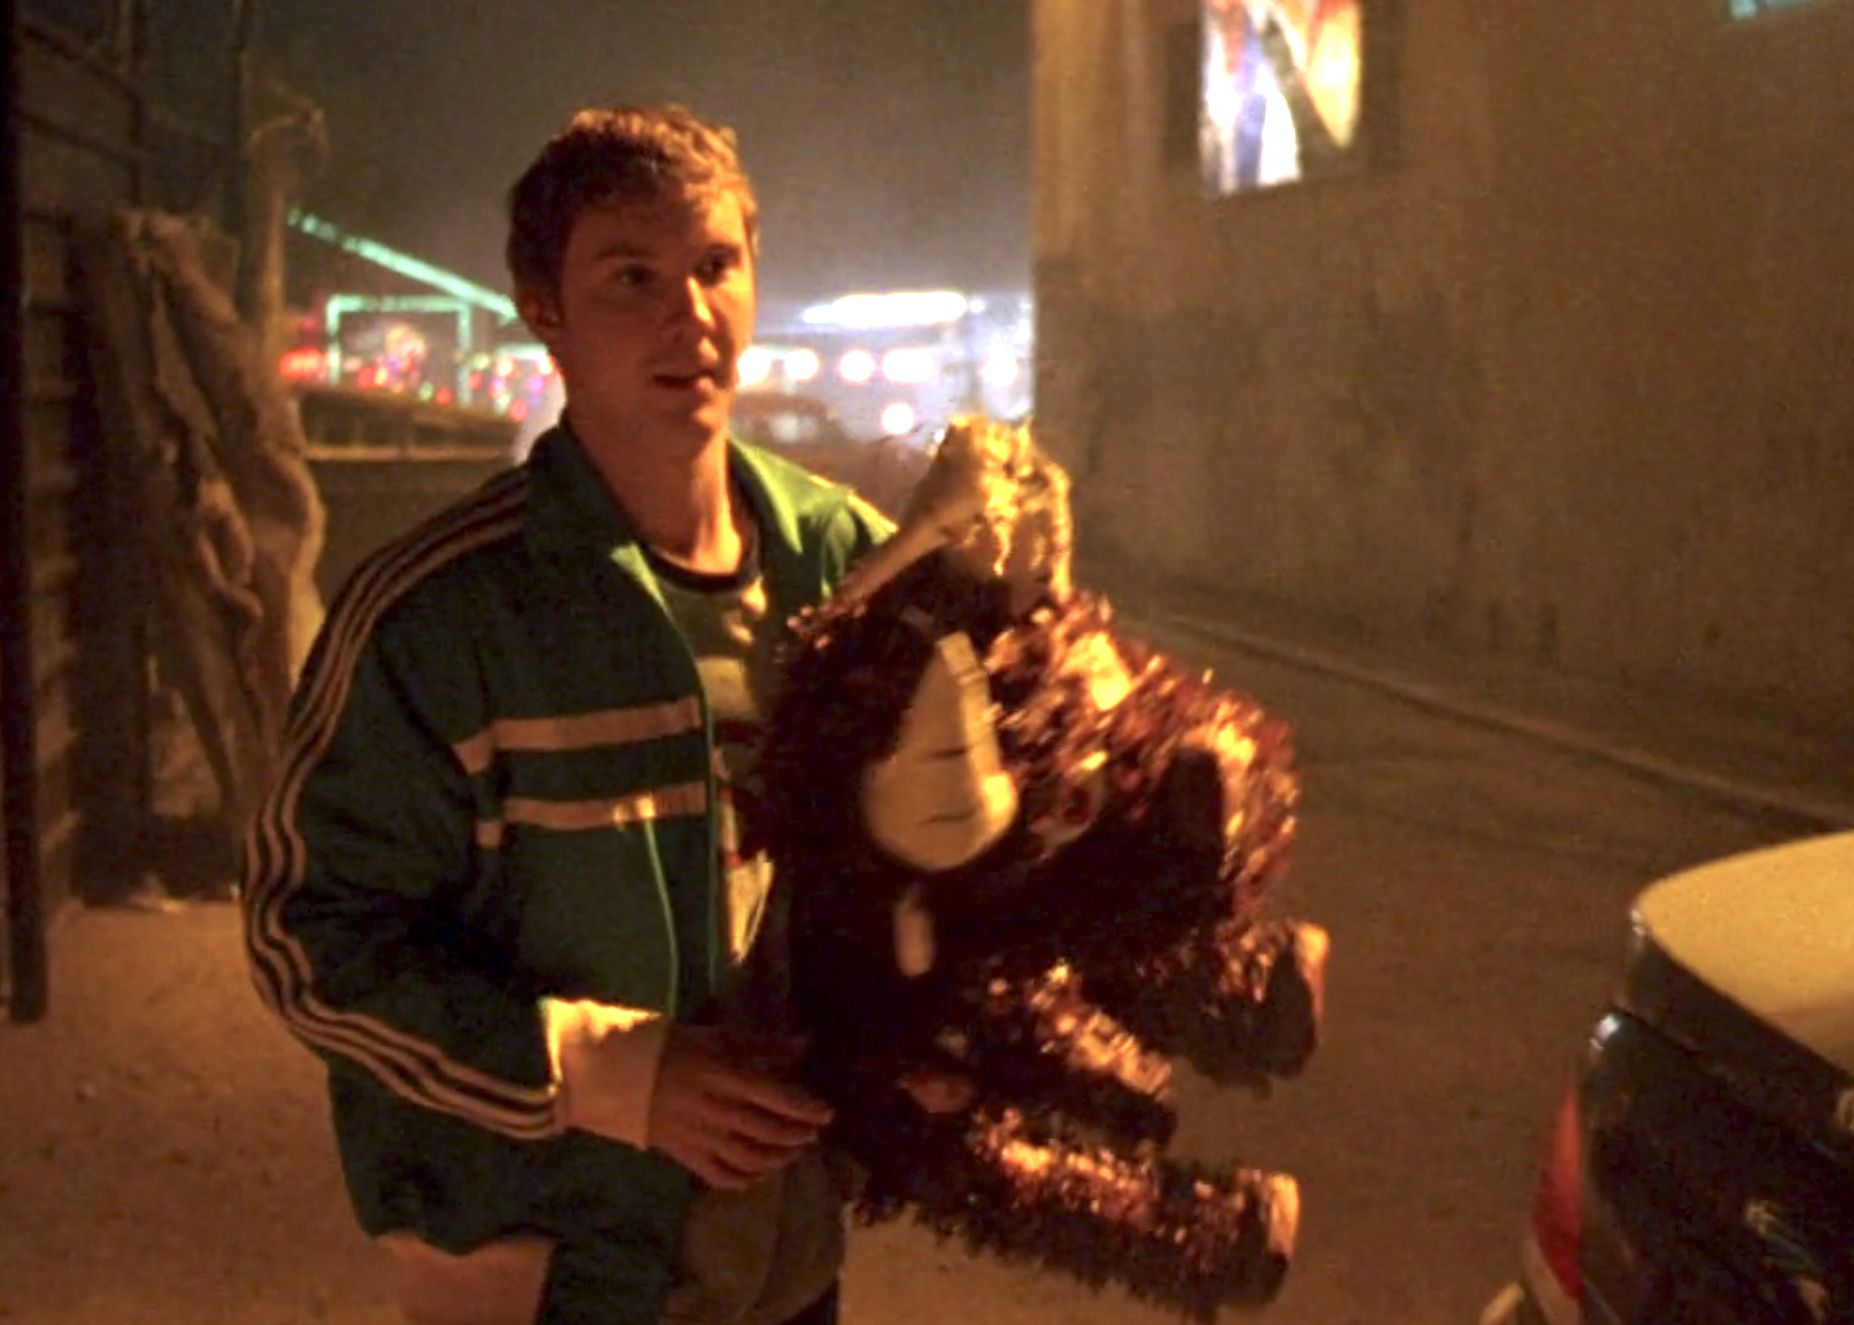 In this screenshot of S1E5, Luke, wearing a green track suit, is carrying a piñata.